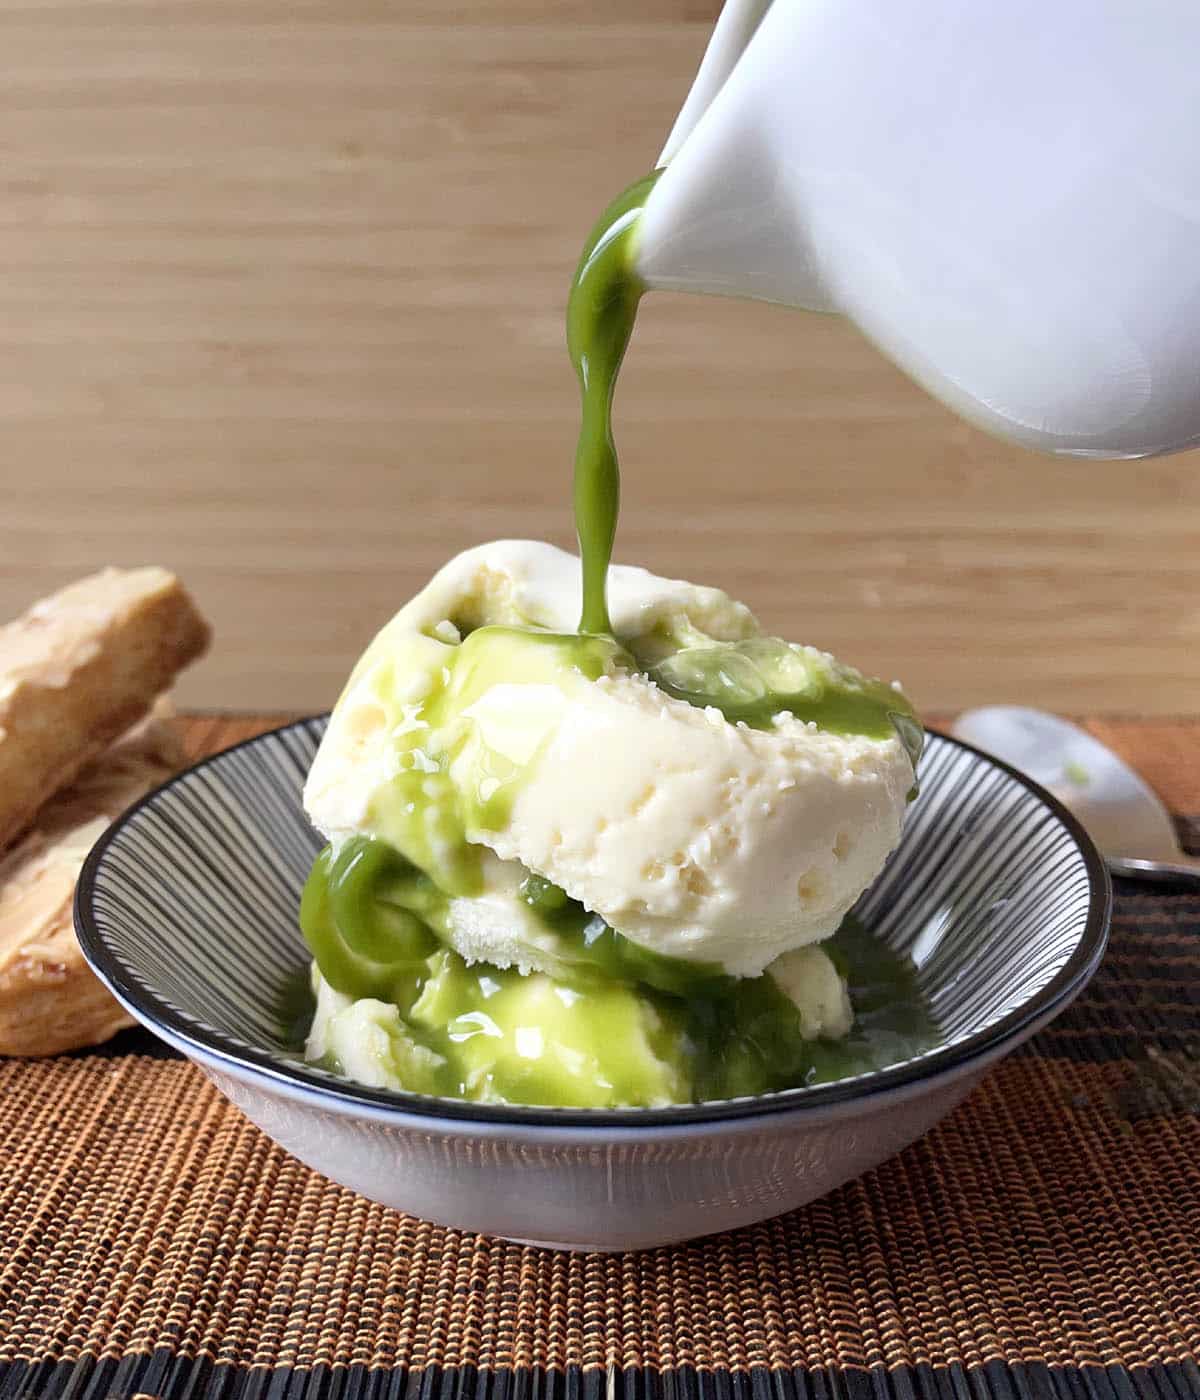 Green matcha tea being poured over two scoops of vanilla ice cream in a black and white dish.